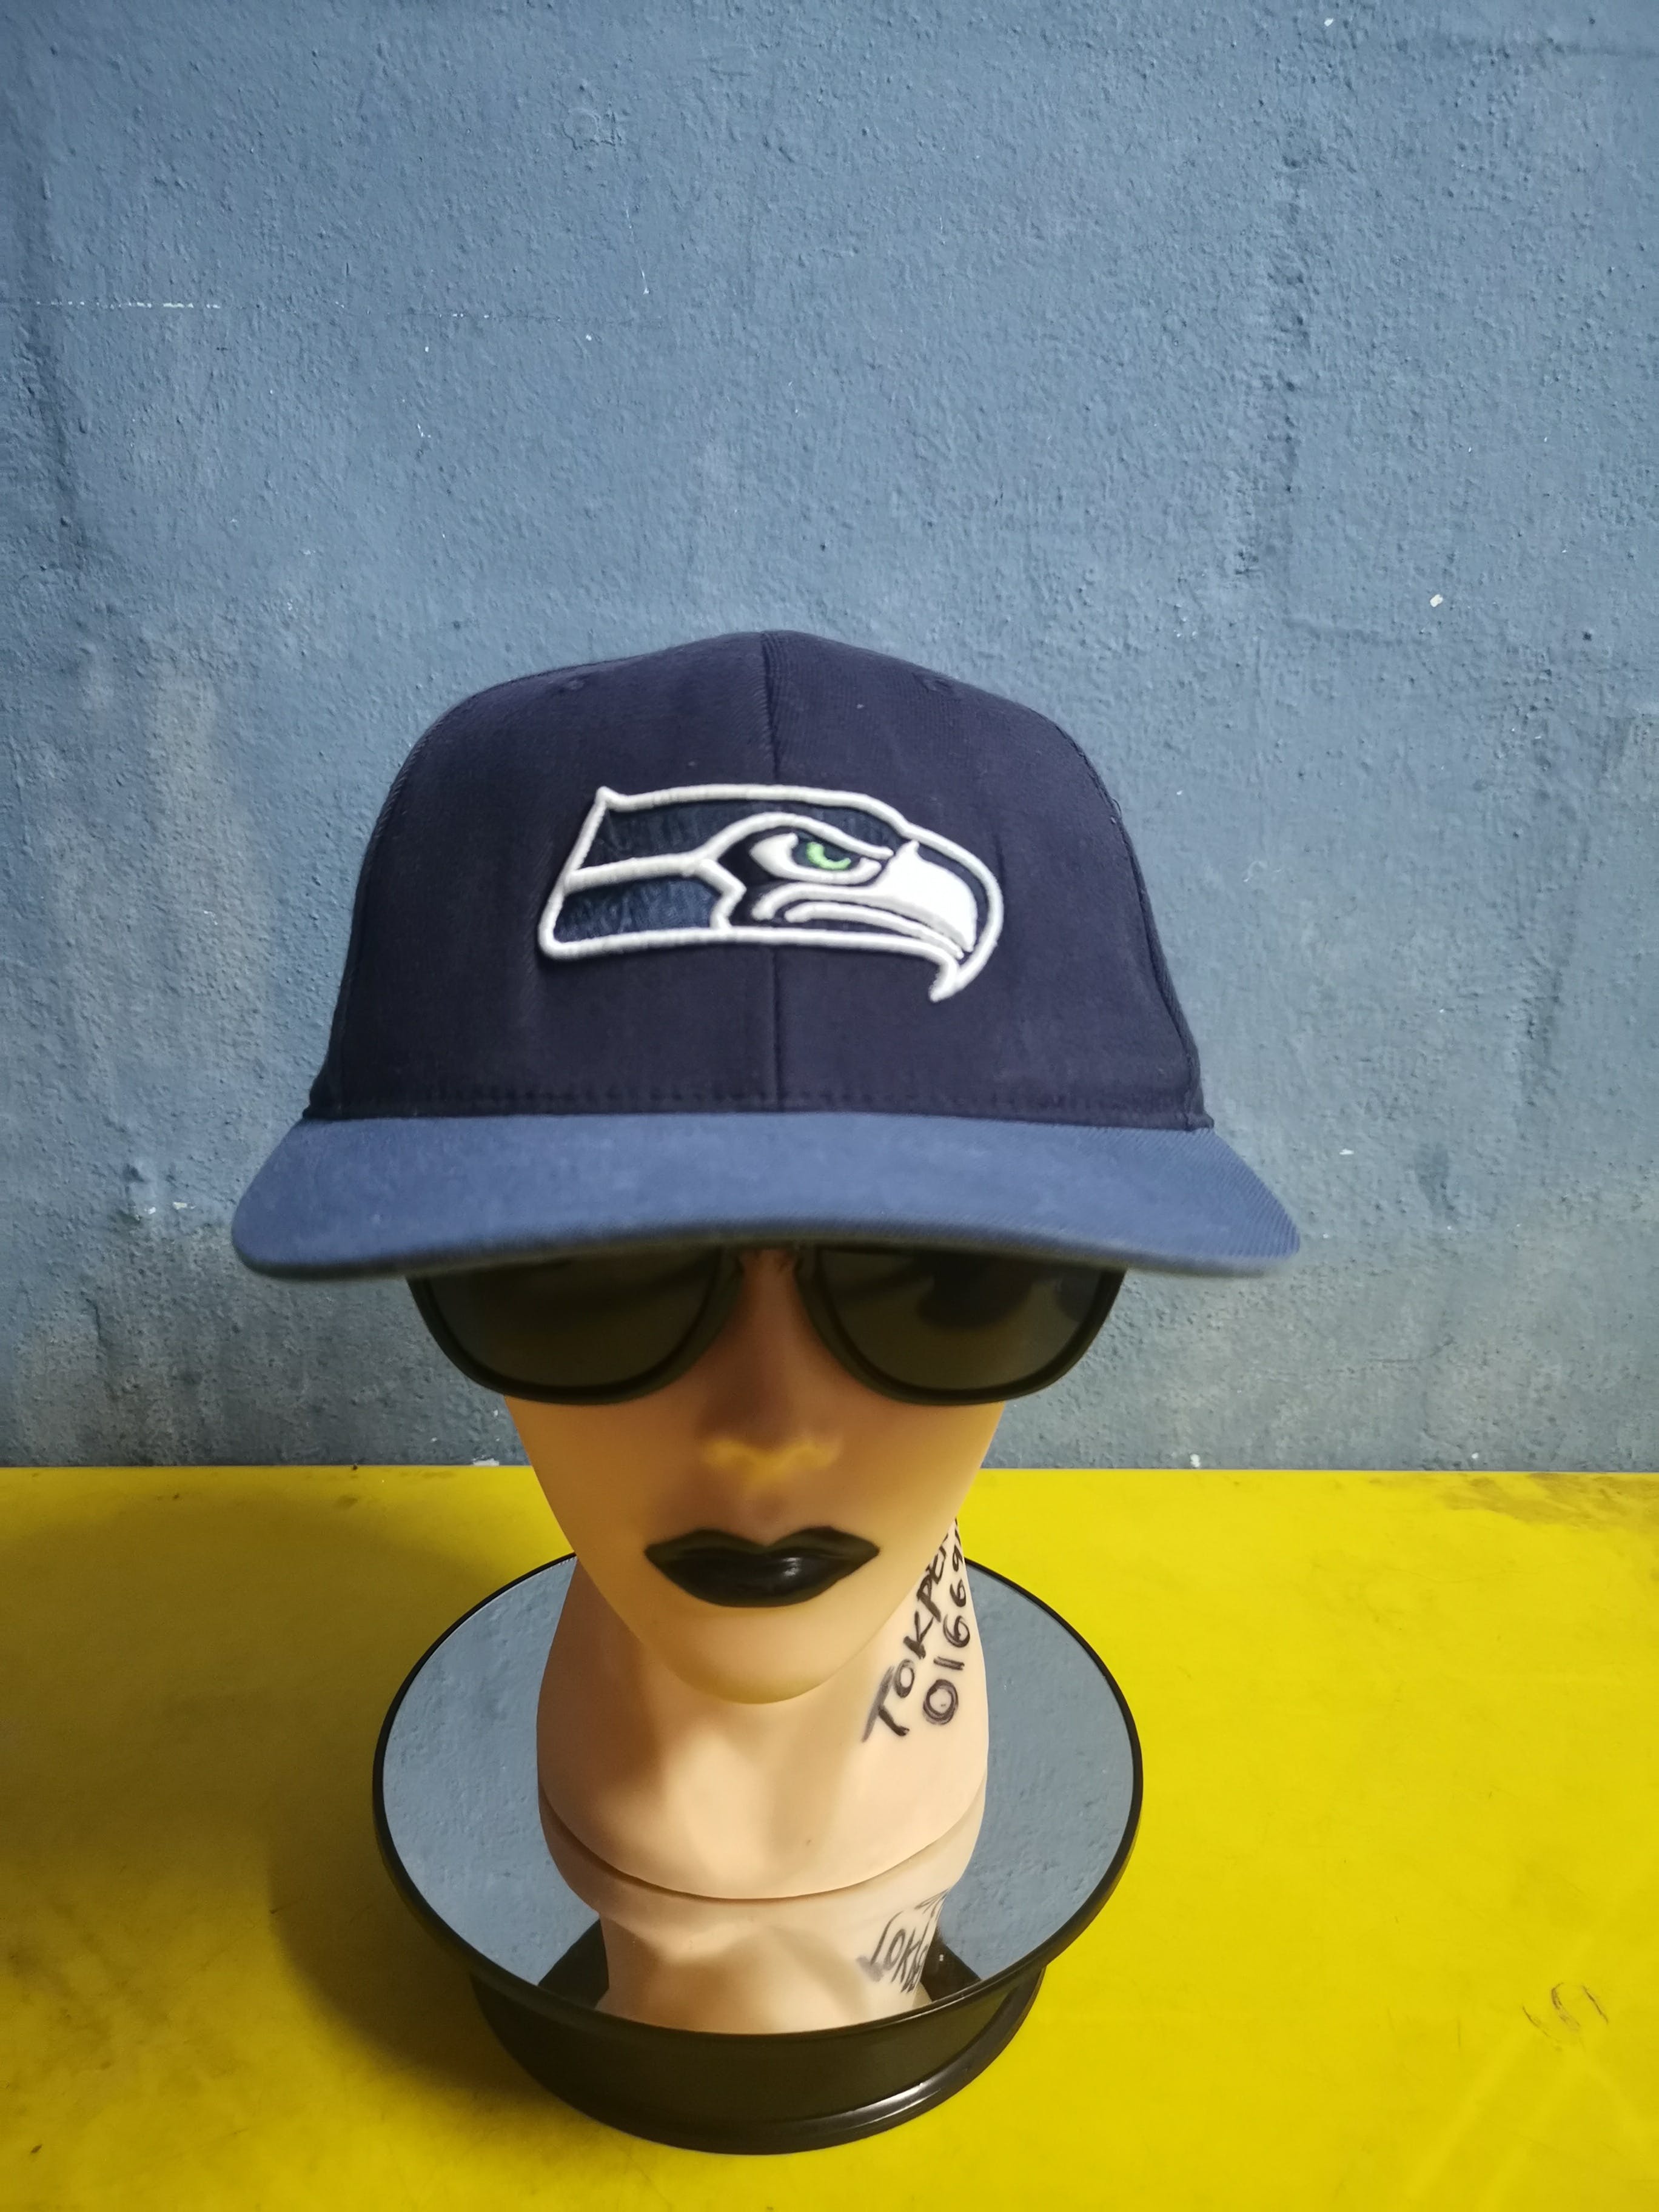 NFL Fullcap Embroidery By Team Apparel Reebok - 1